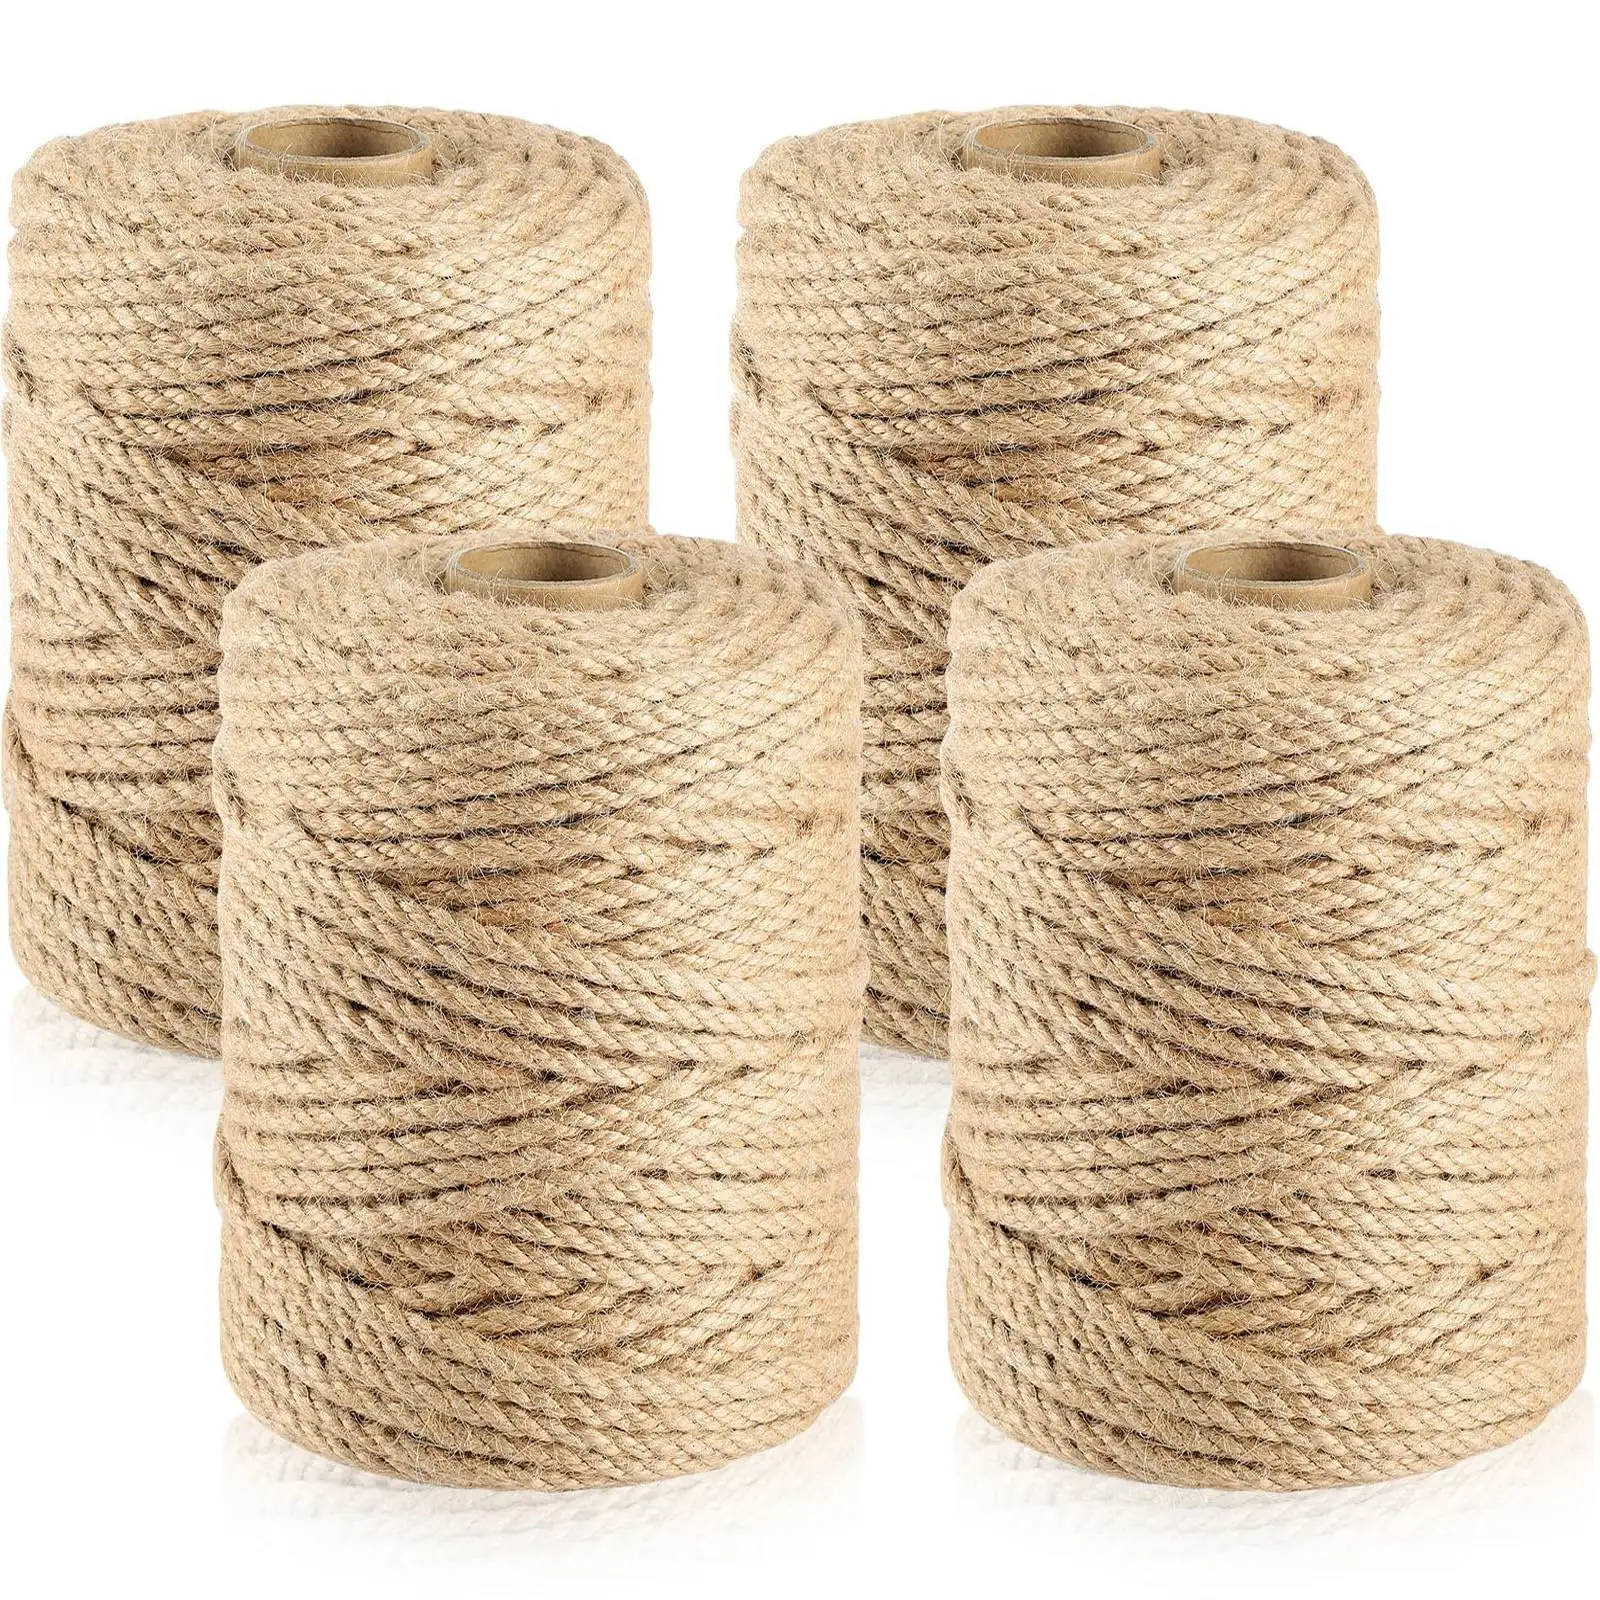 High Quality Factory Price Gardening Natural Jute Rope Twine 2mm 4mm 6mm Jute rope